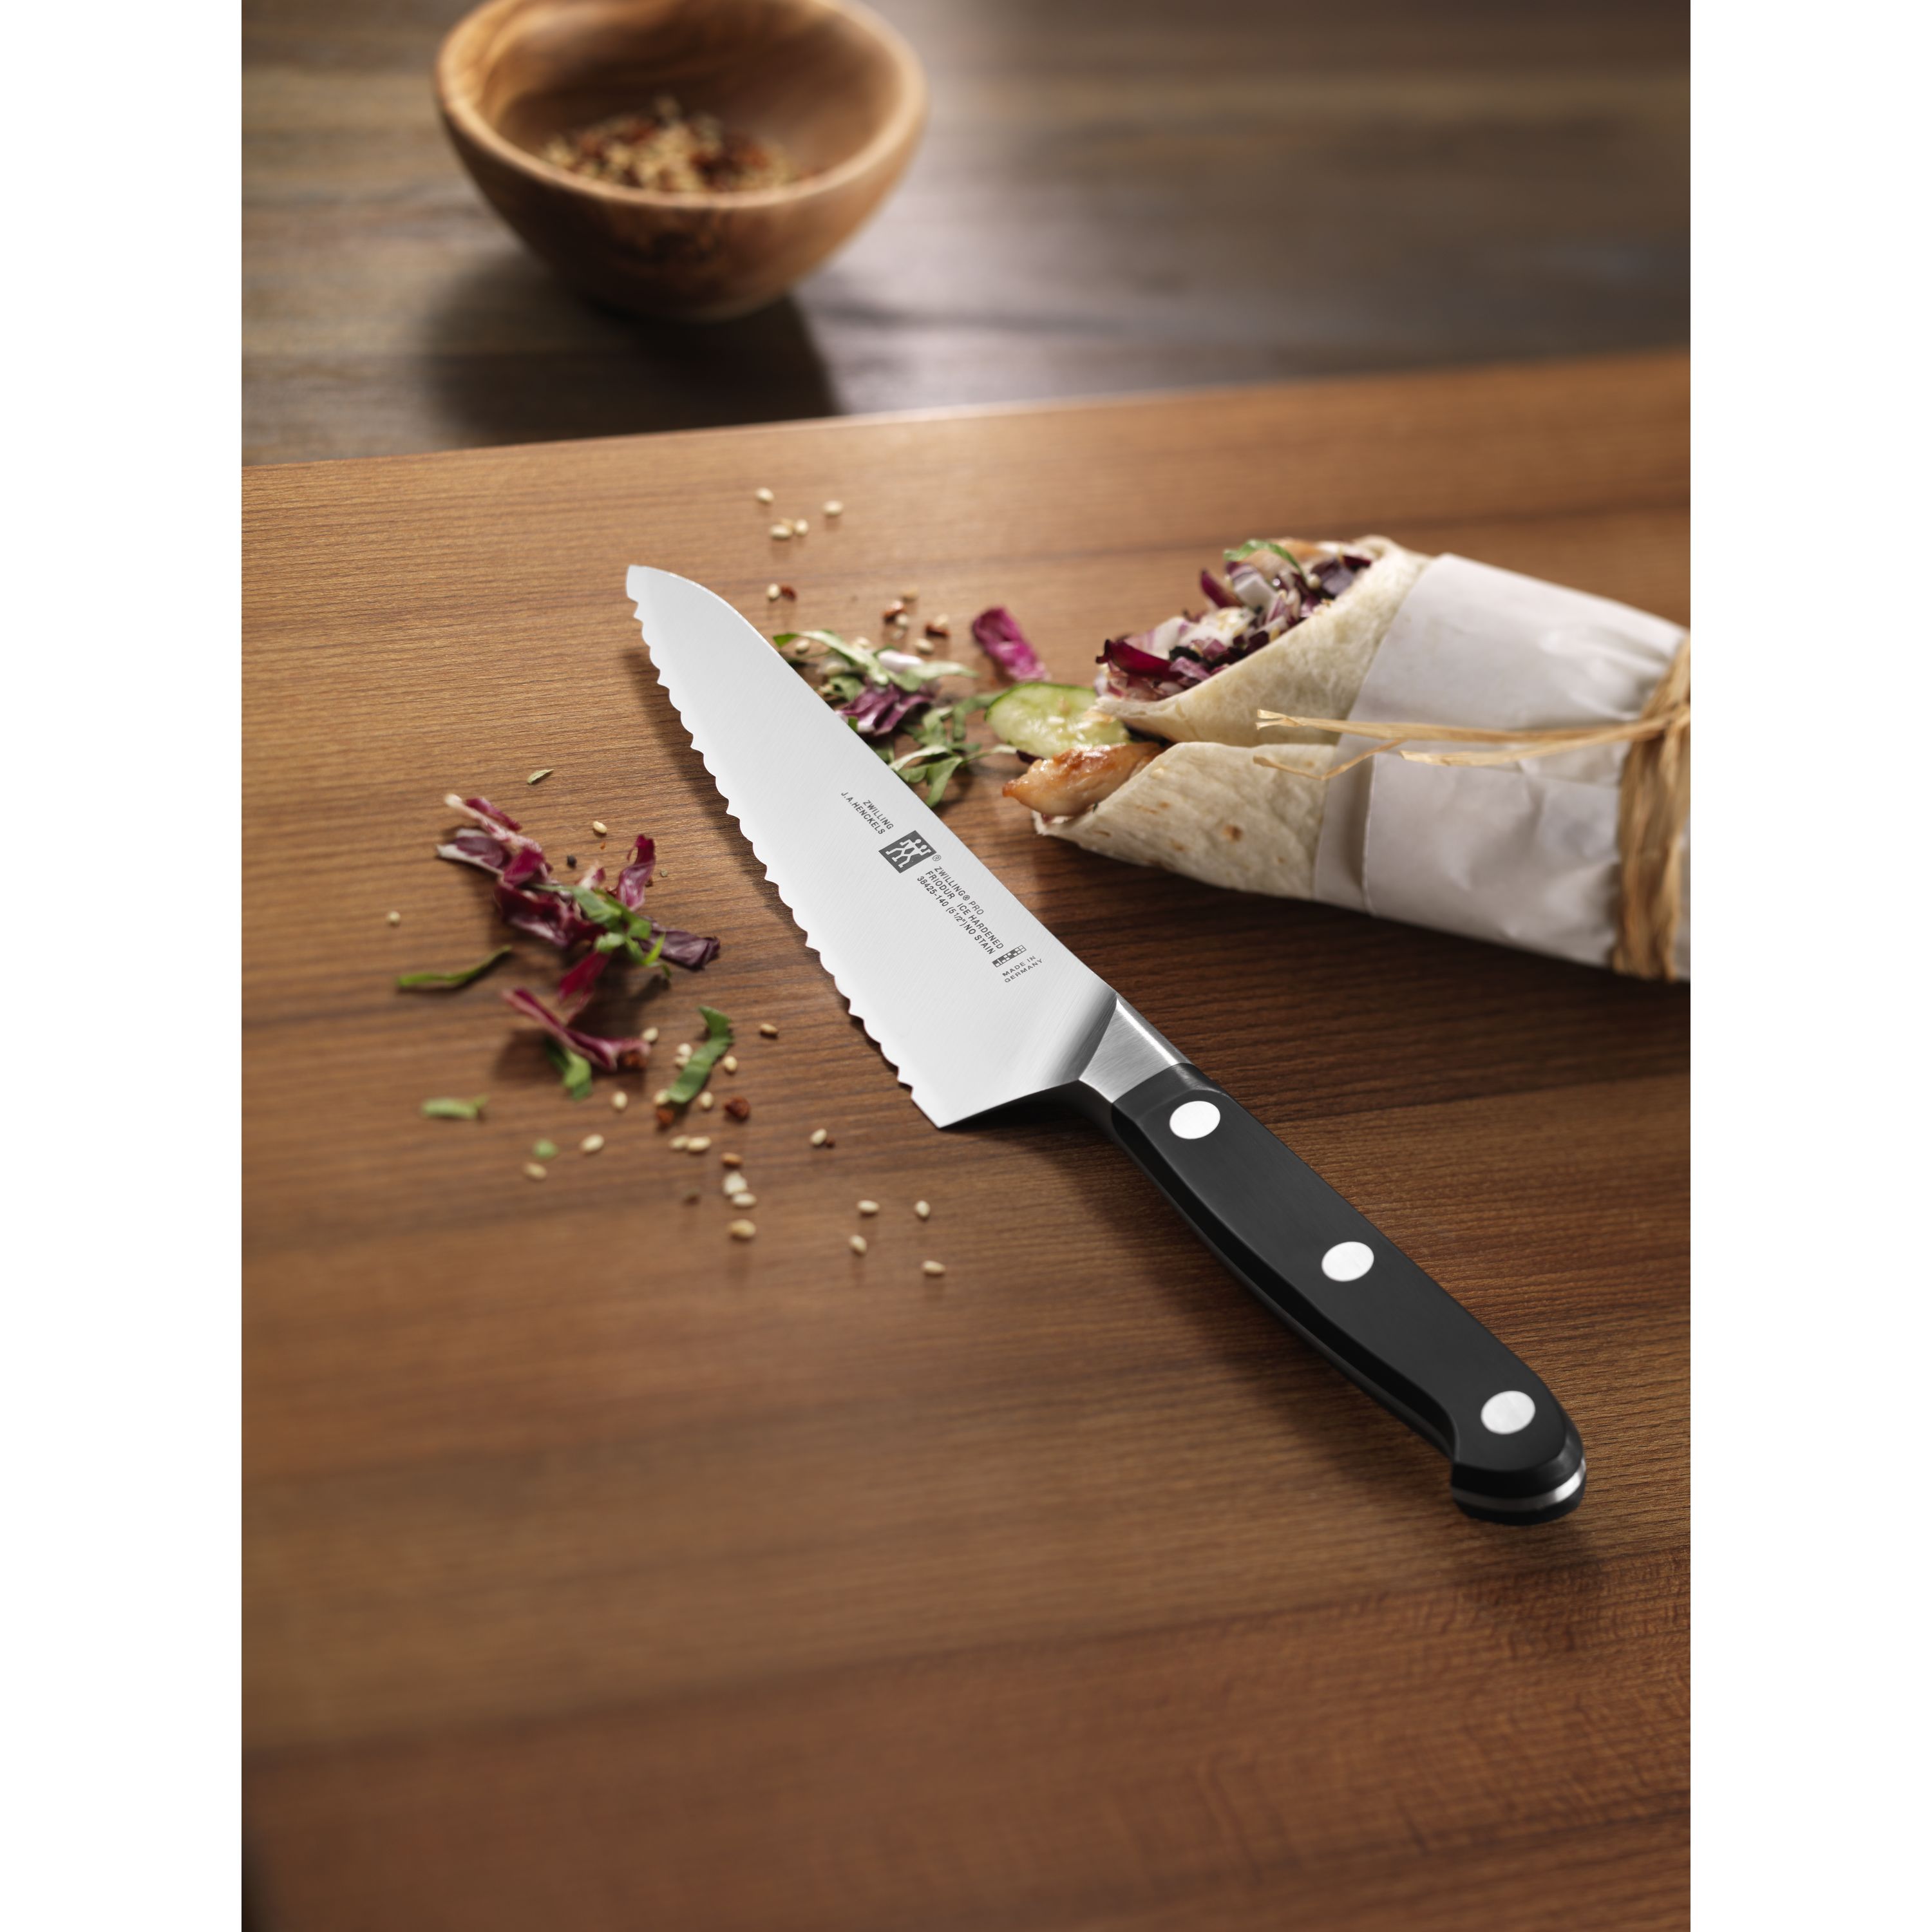 ZWILLING J.A. Henckels 5.5 Serrated Prep Knife Four Star + Reviews